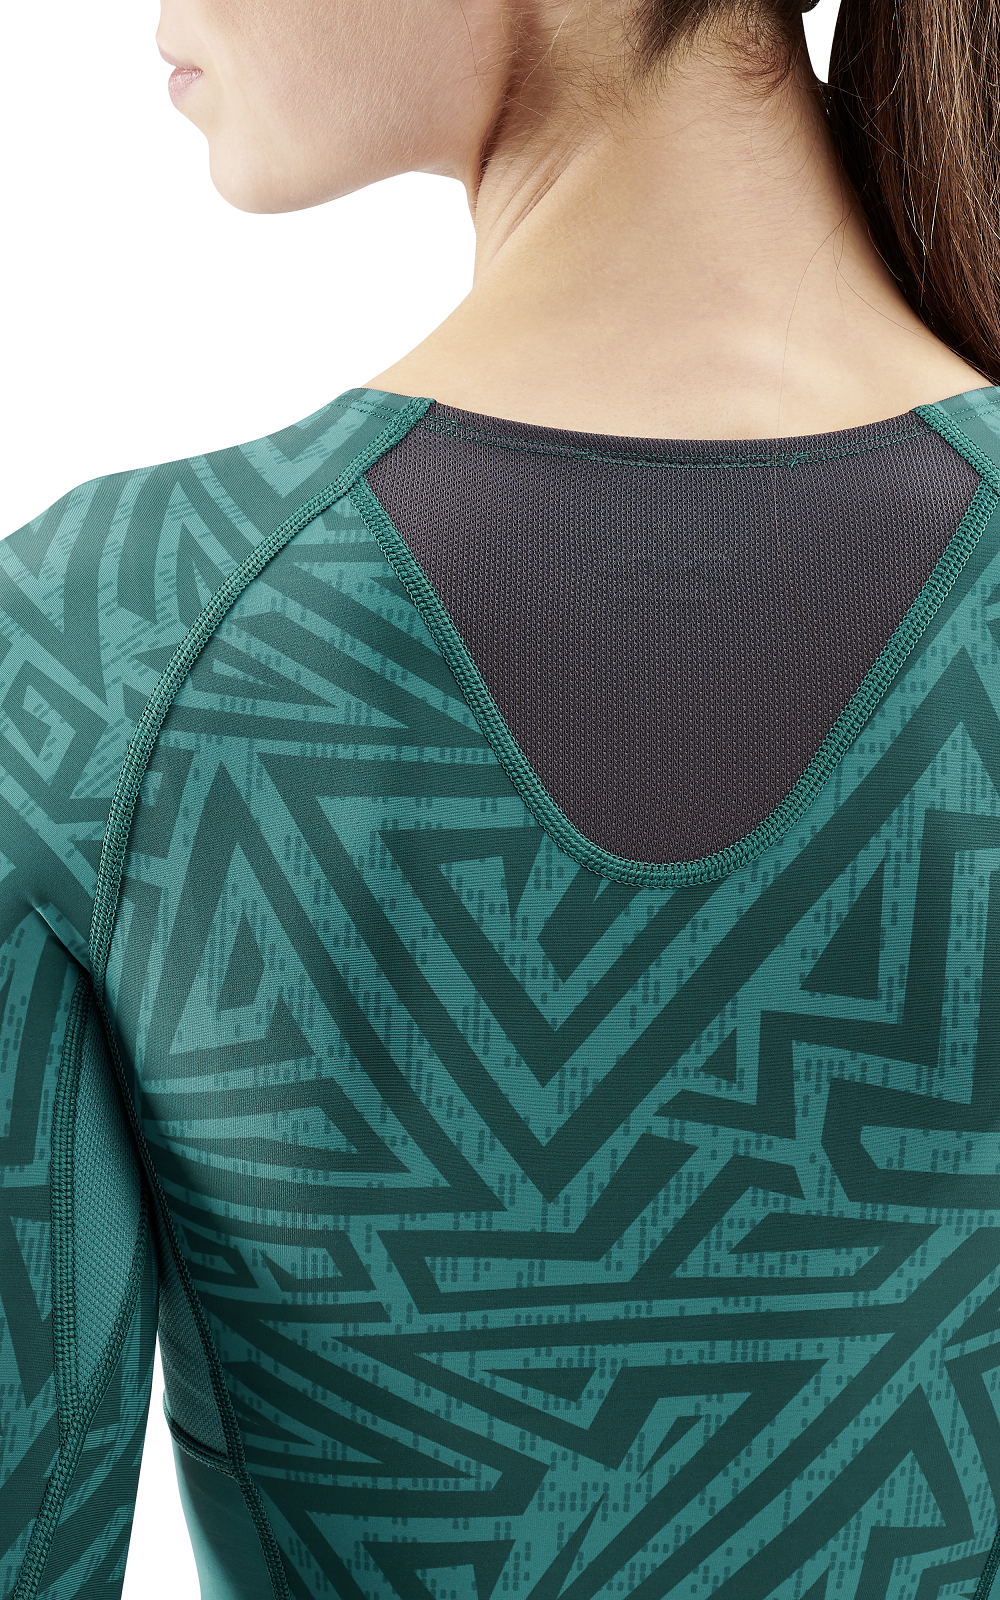 Skins Women's Compression Long Sleeve Tops 3-Series - Lt. Teal Angle